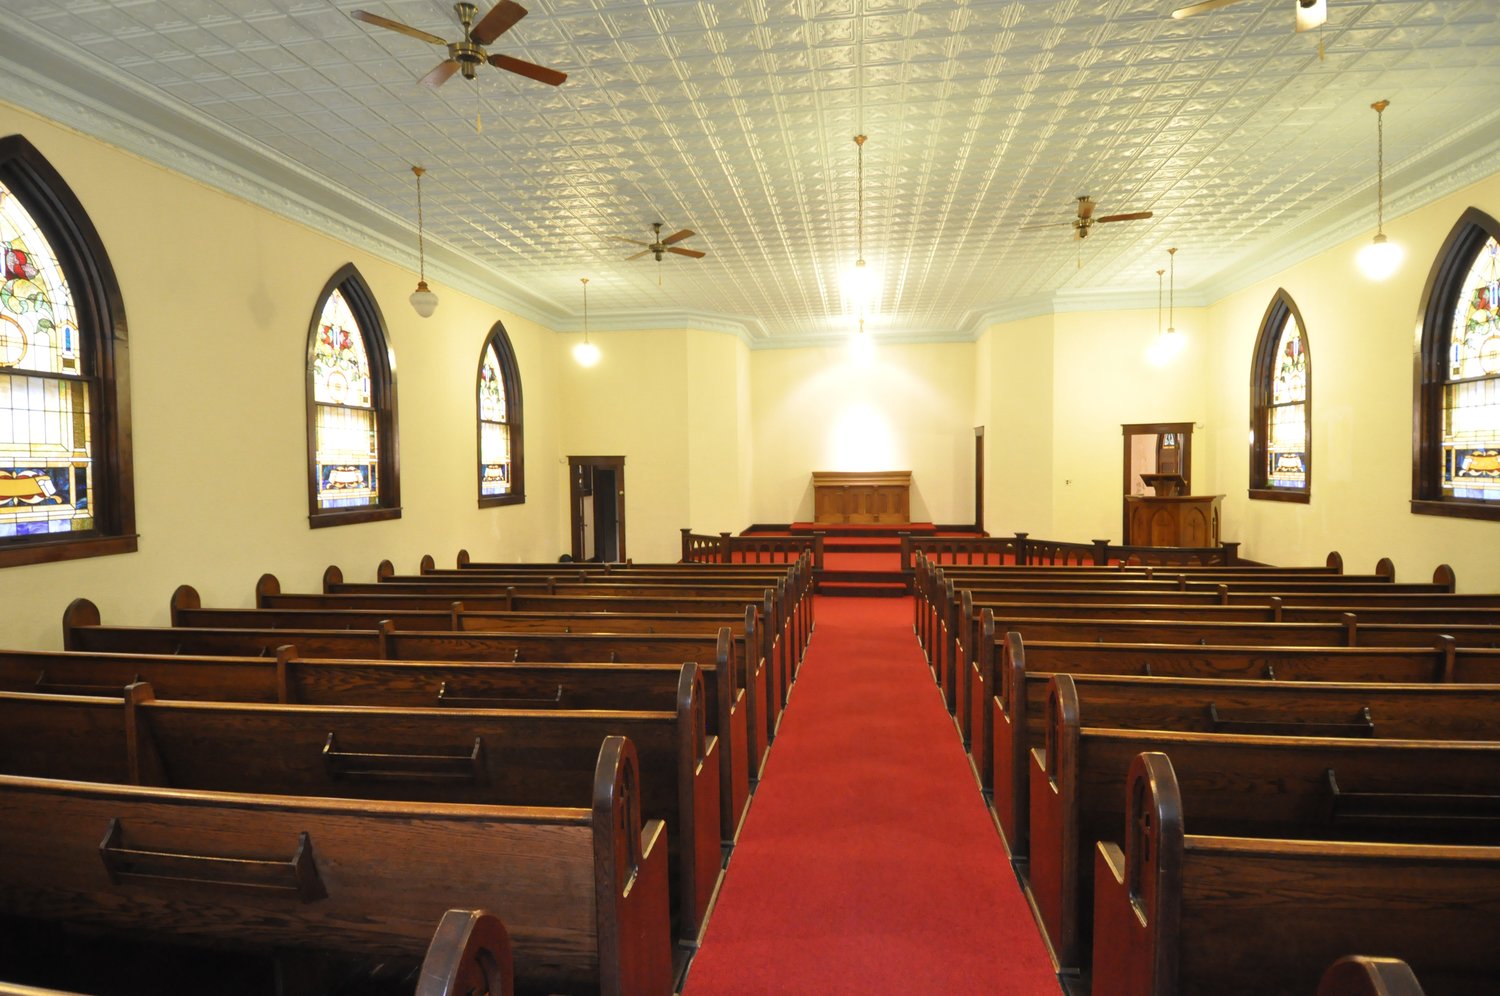 The sanctuary of the former Phanuel Lutheran Church is available for weddings at the Historic Lutheran Church Event Center. An open house is set for Feb. 8.